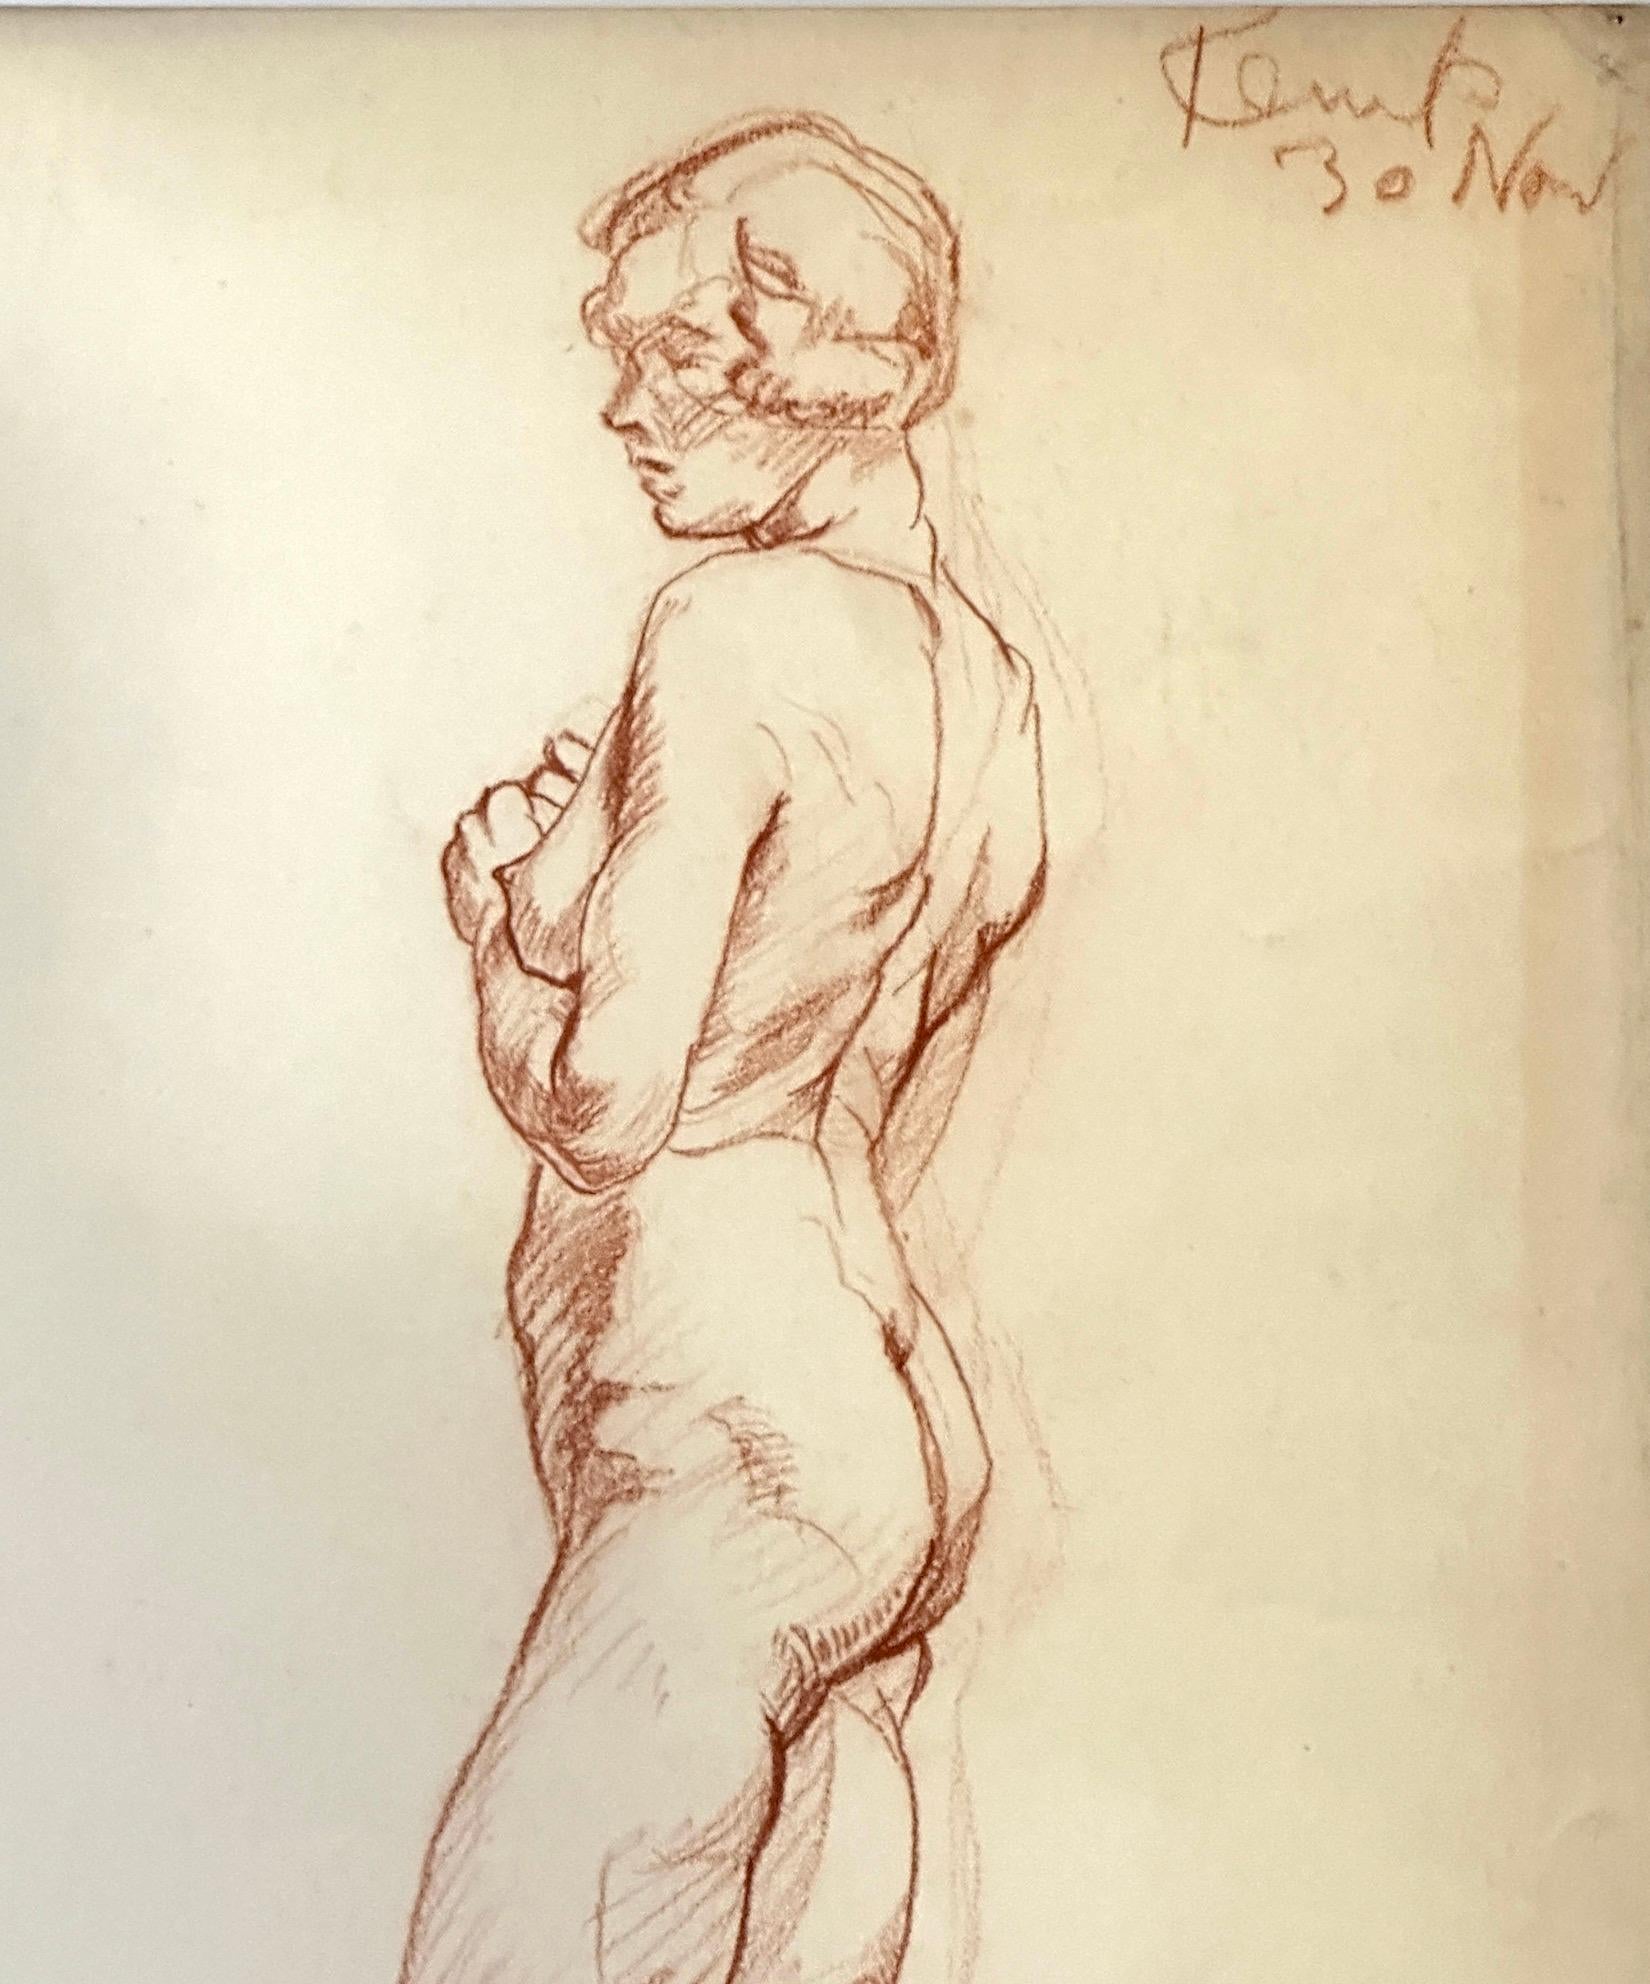 Davis Kemp
Early 20th century Red Chalk drawing of Art Deco nude women with Bob hair style.

Very well drawn nude study of two women from 1928 in the Art Deco style. 

A strong and well observed red chalk drawing from a collection of similar pieces.